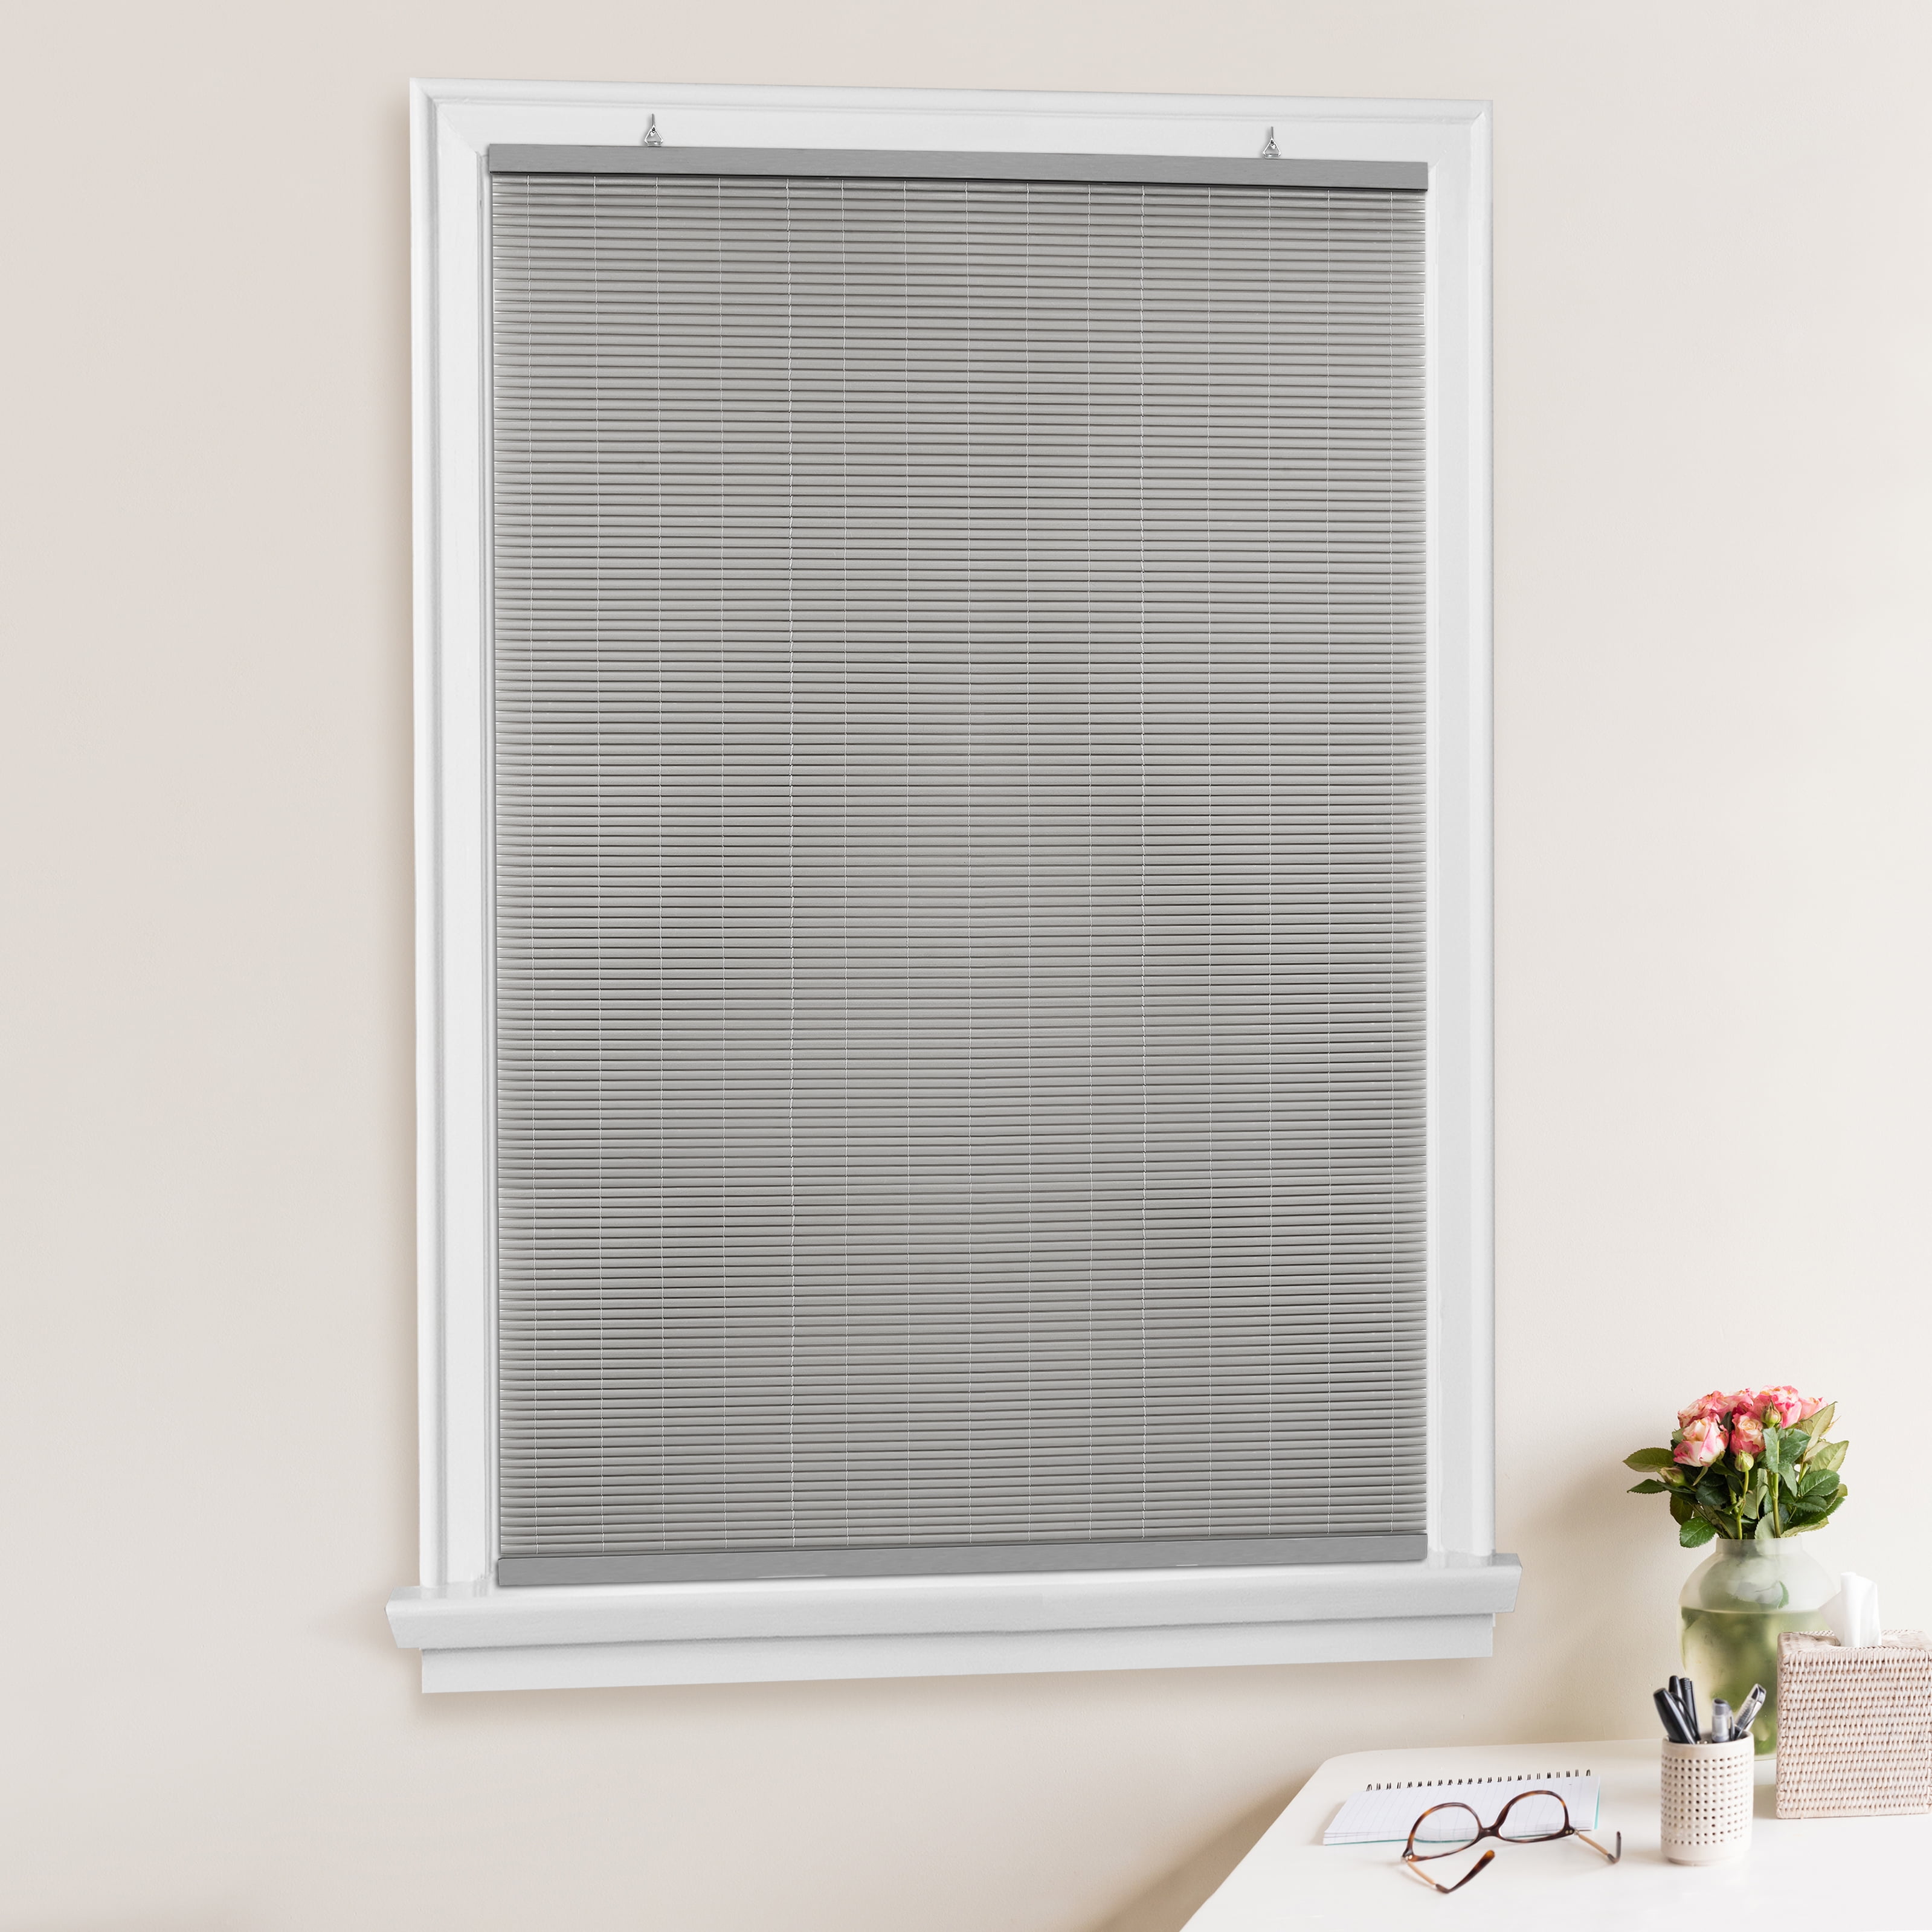 Woodtone Oval Cordless Rollup Light Filtering Window Blinds Shades 